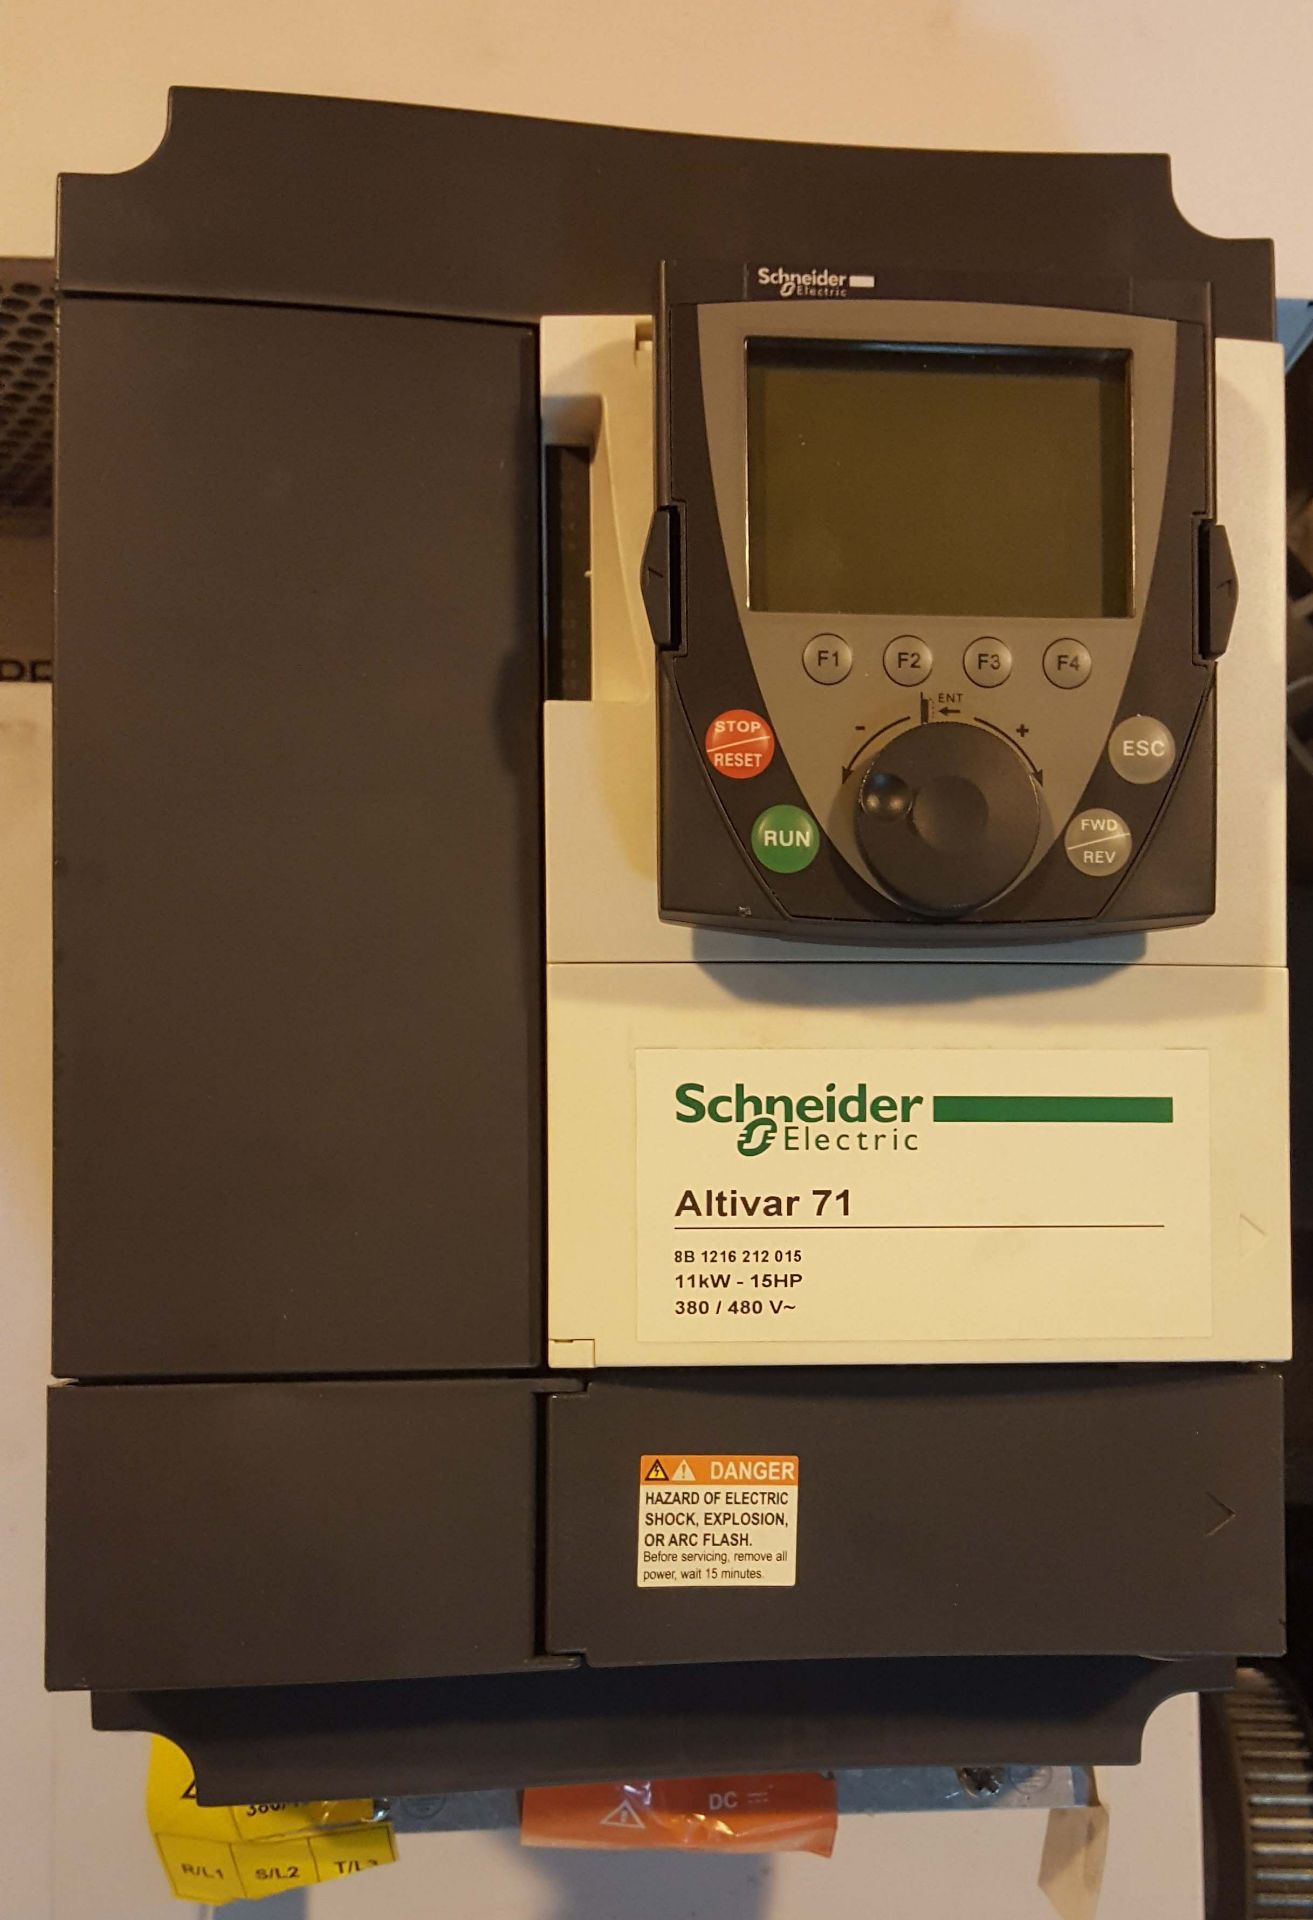 Schneider Altivar 71 11Kw-15 HP Drive with Ventilated Cabinet - Image 2 of 2